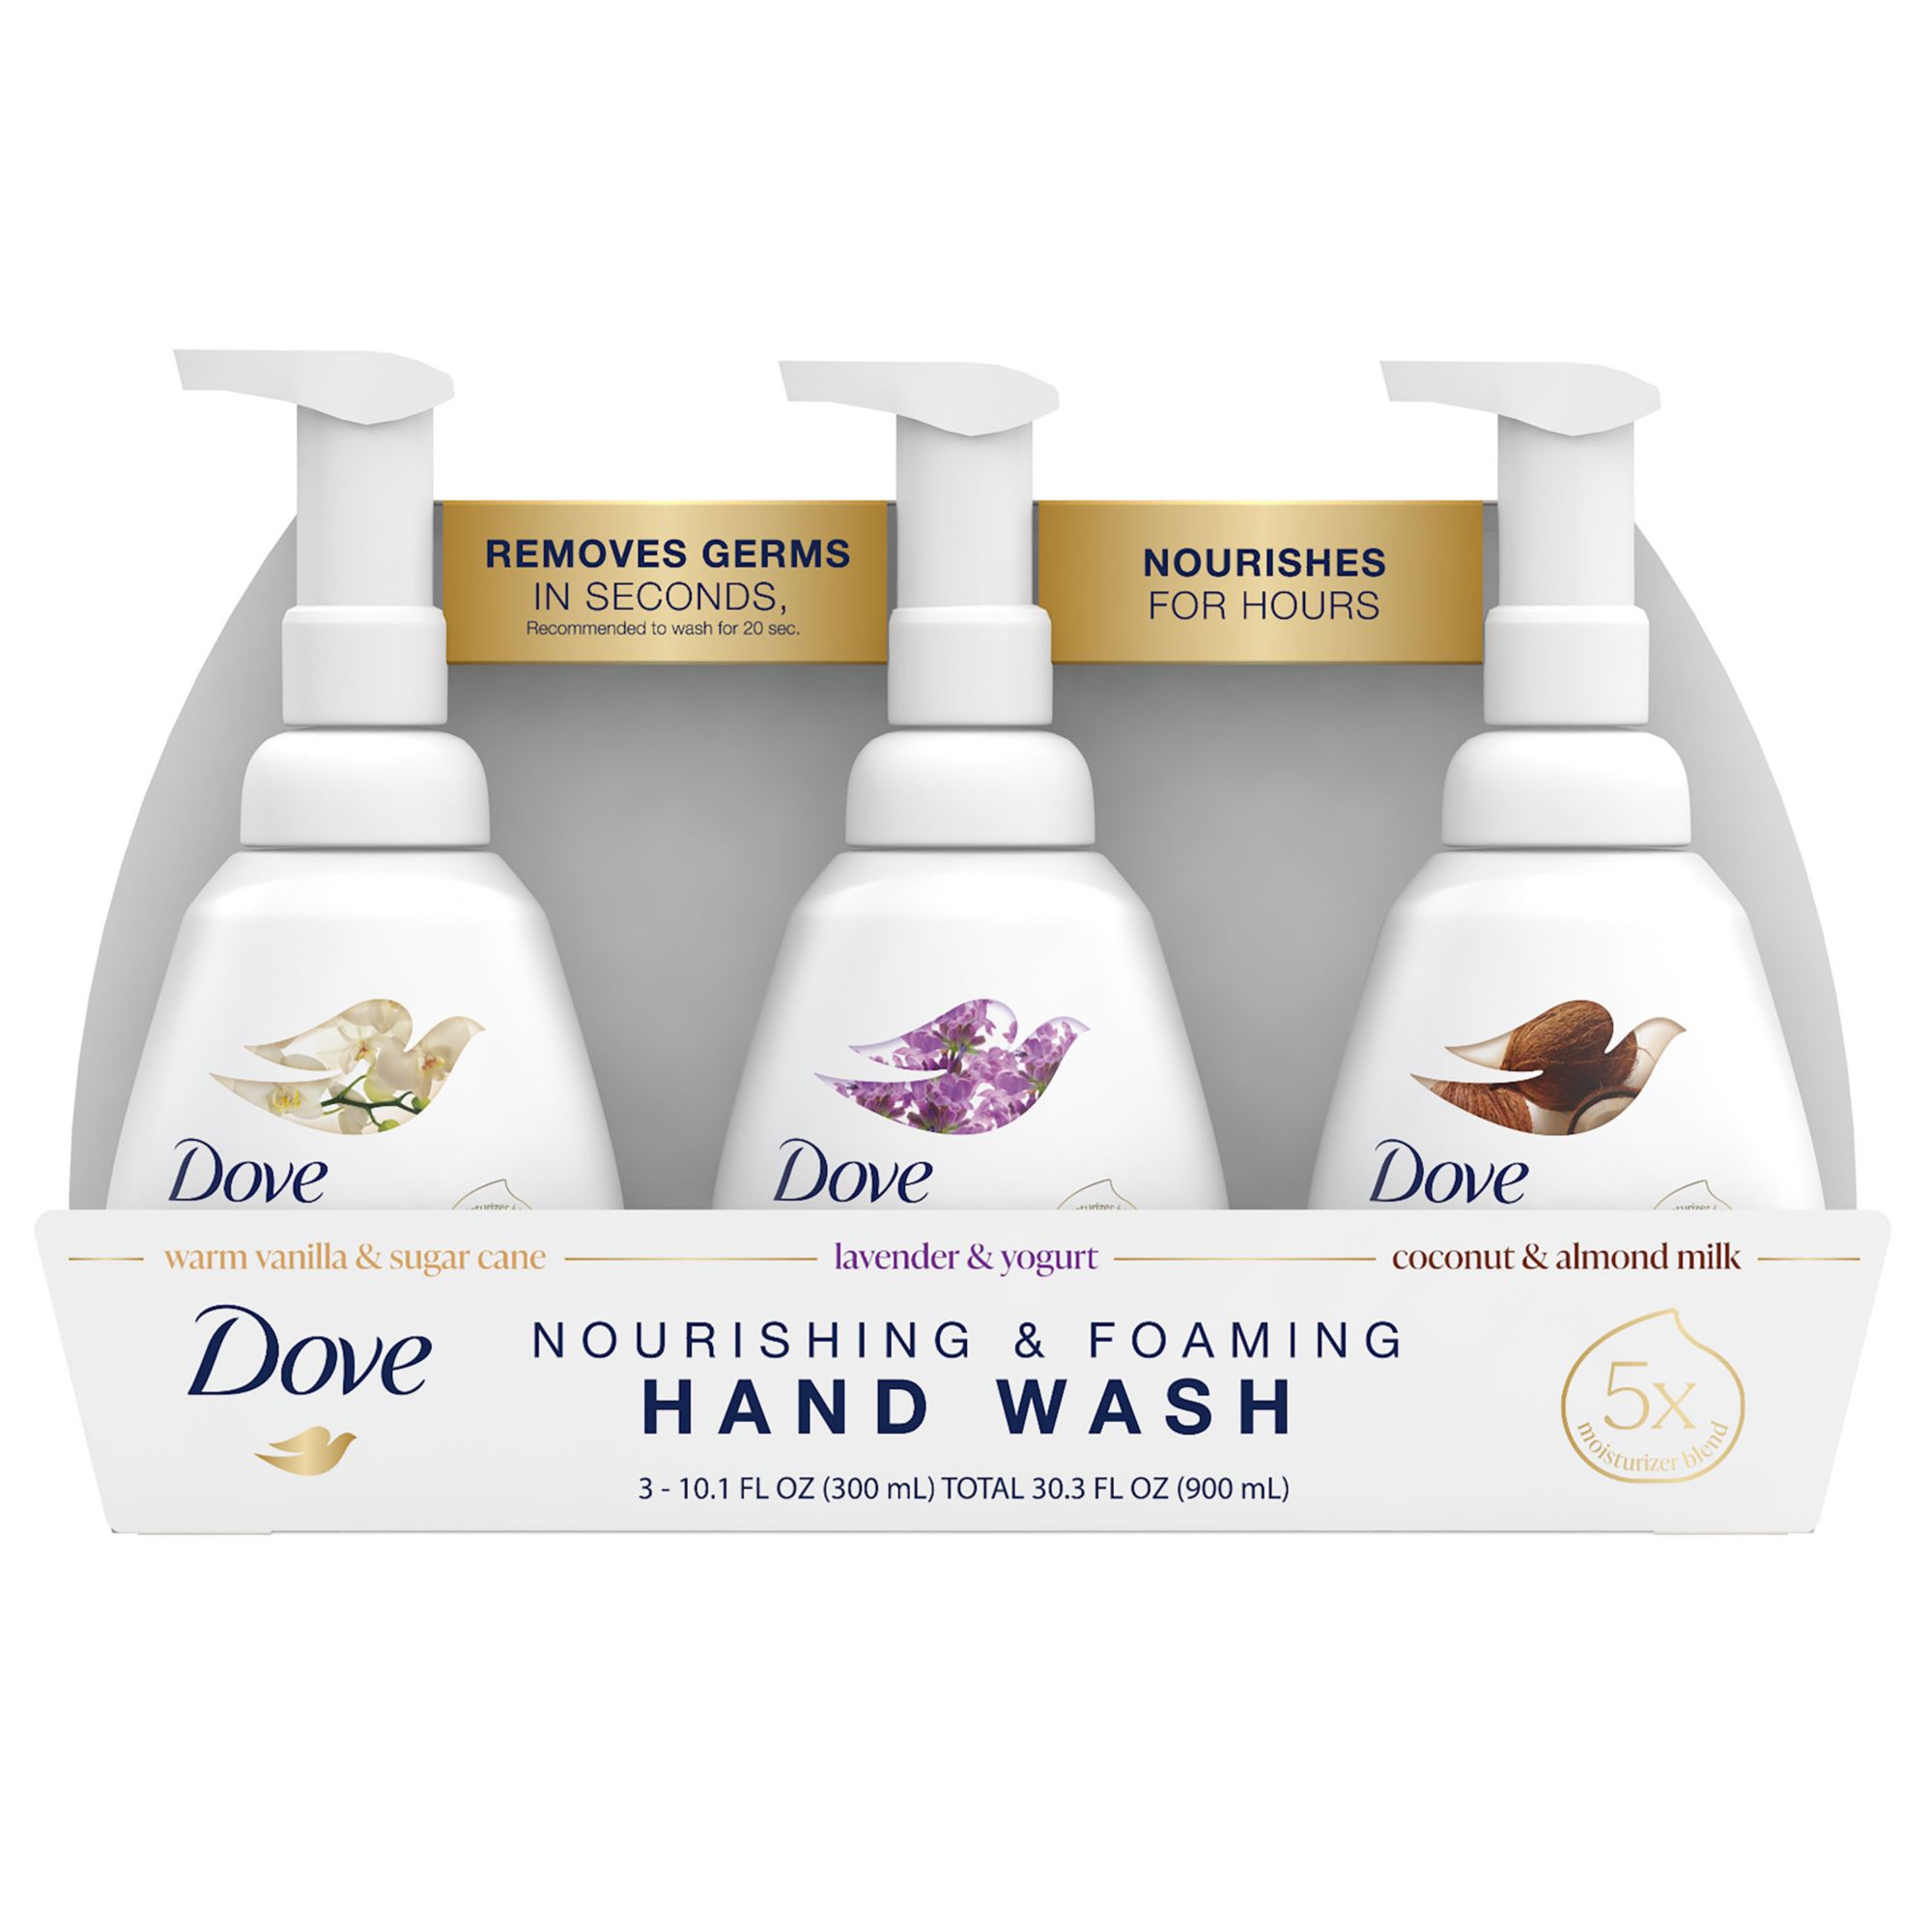 Dove Foaming Hand Variety Pack, 3 ct.